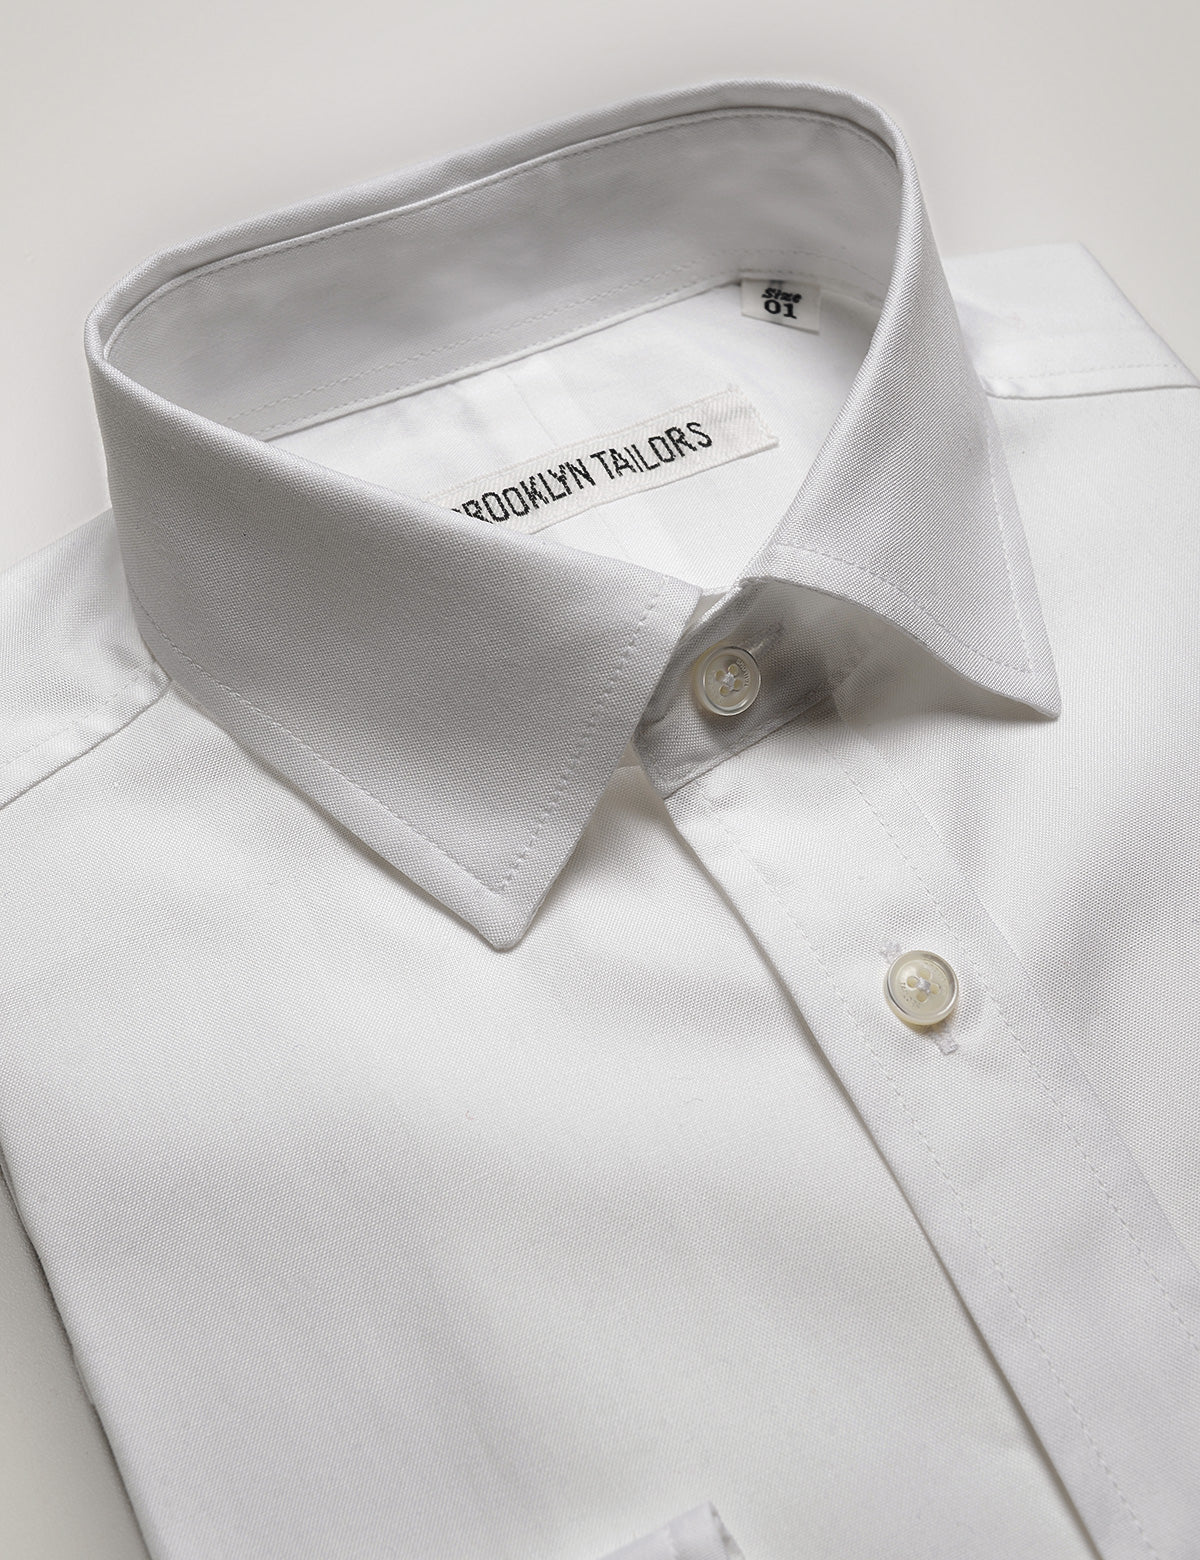 Detail of collar, buttons, labeling, and fabric texture on Brooklyn Tailors BKT20 Slim Dress Shirt in Pinpoint Oxford - White